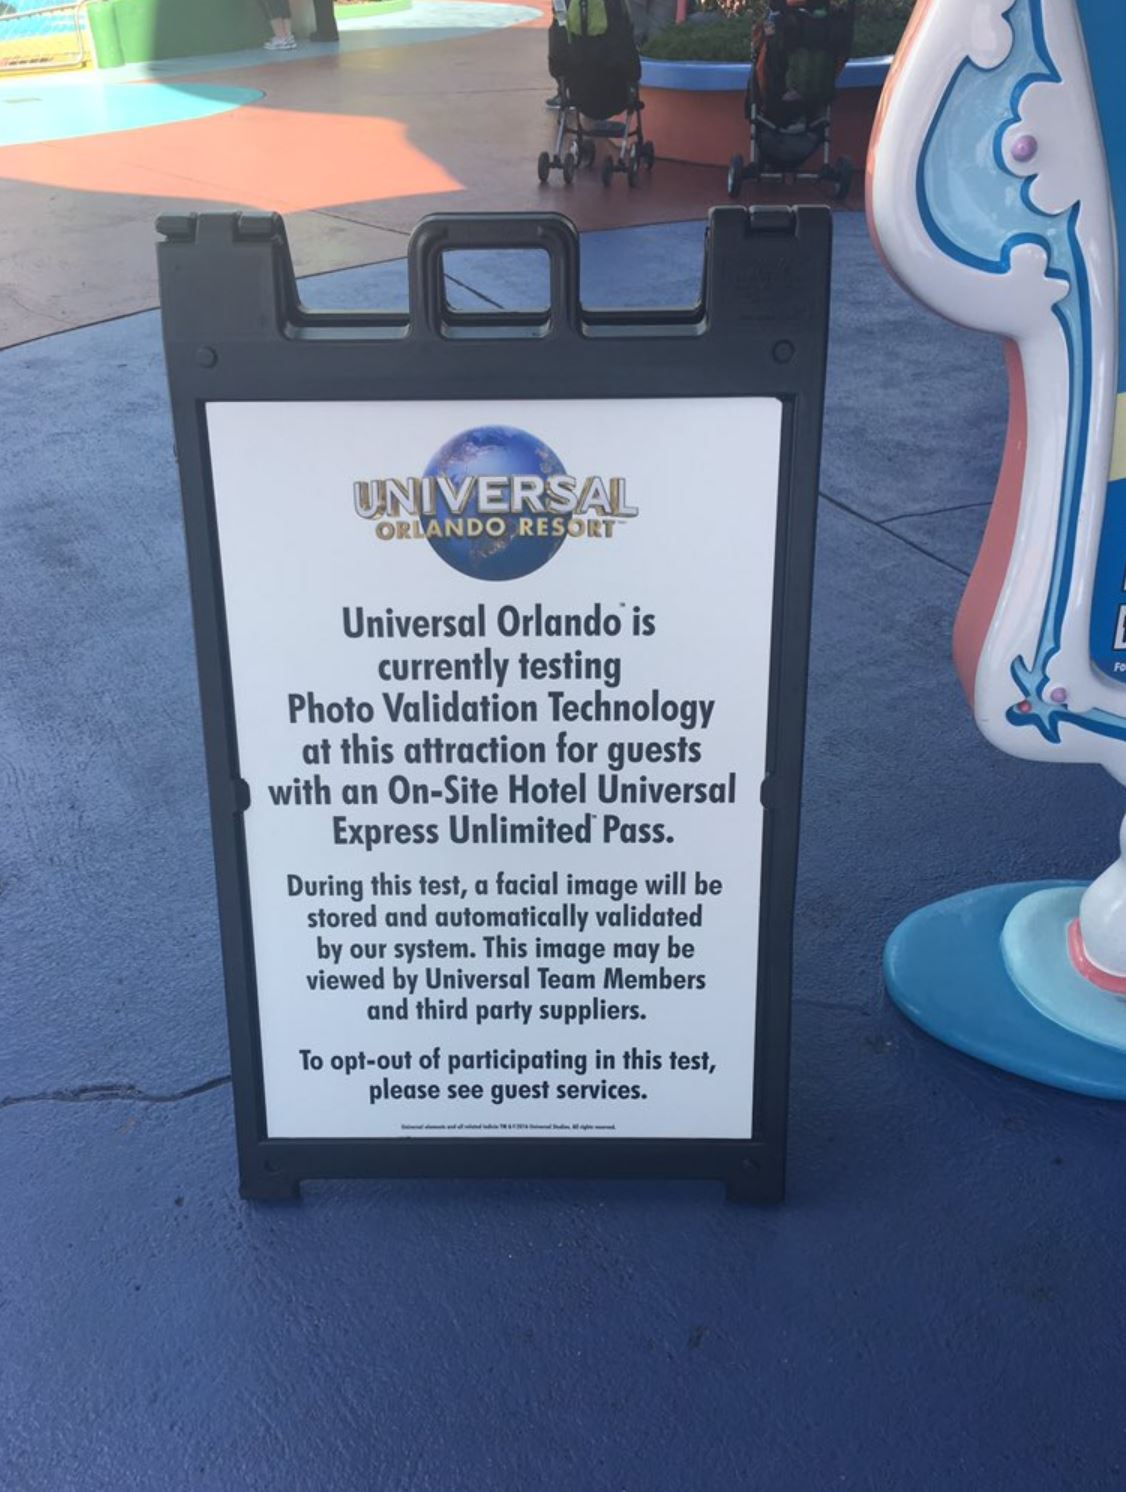 Magic Kingdom Uses COVID-19 As An Excuse To Install Facial
Recognition 2